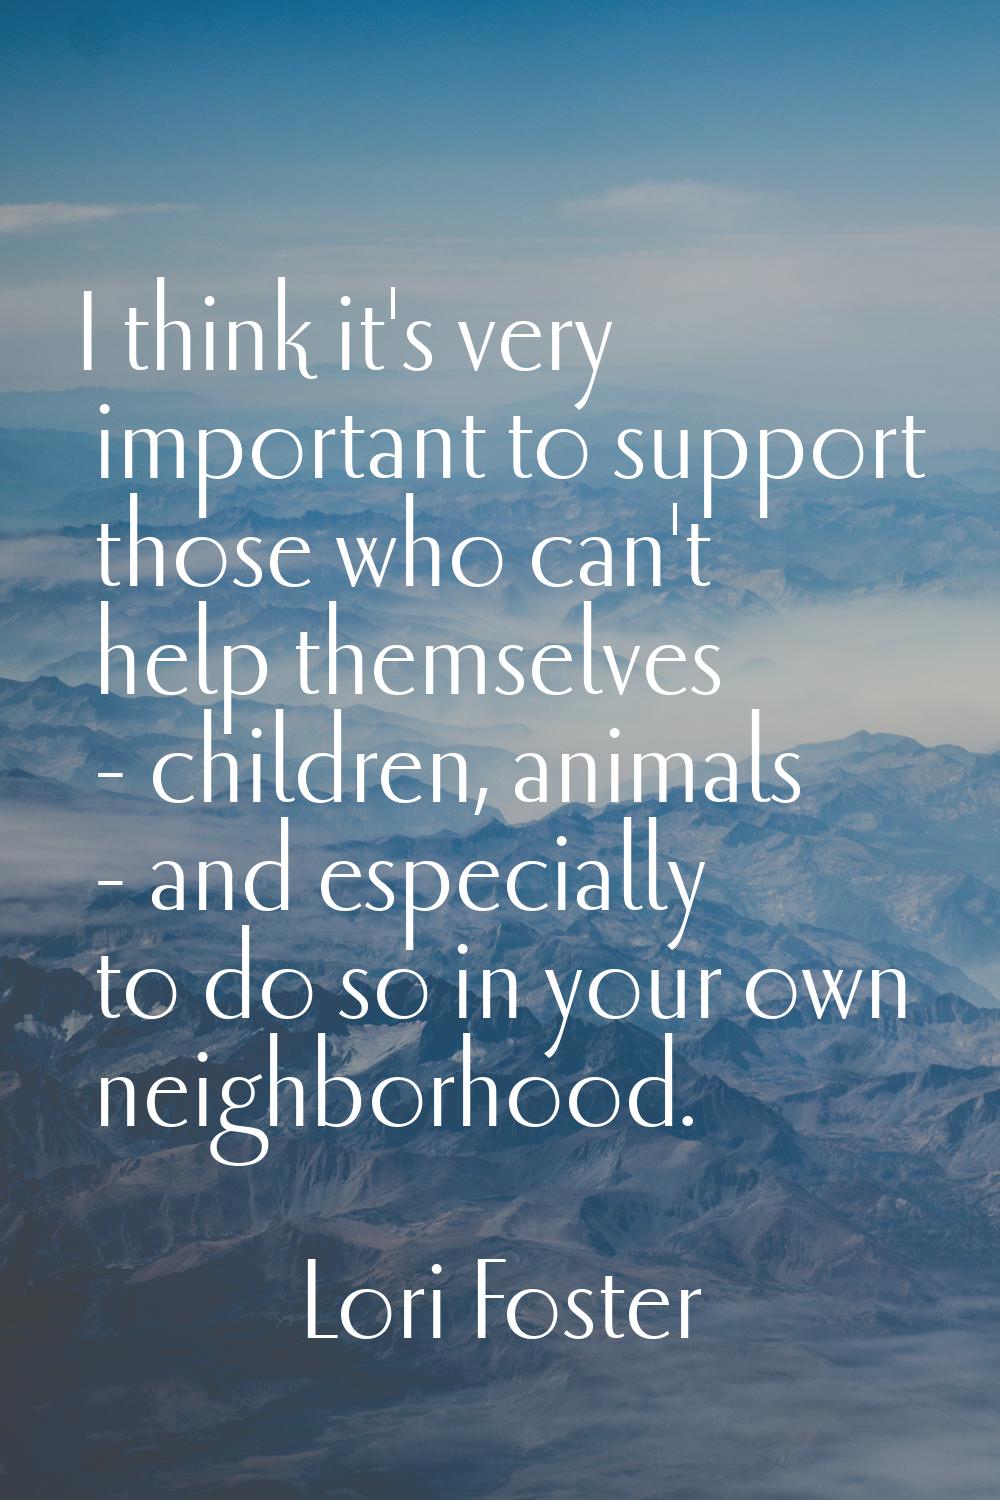 I think it's very important to support those who can't help themselves - children, animals - and es